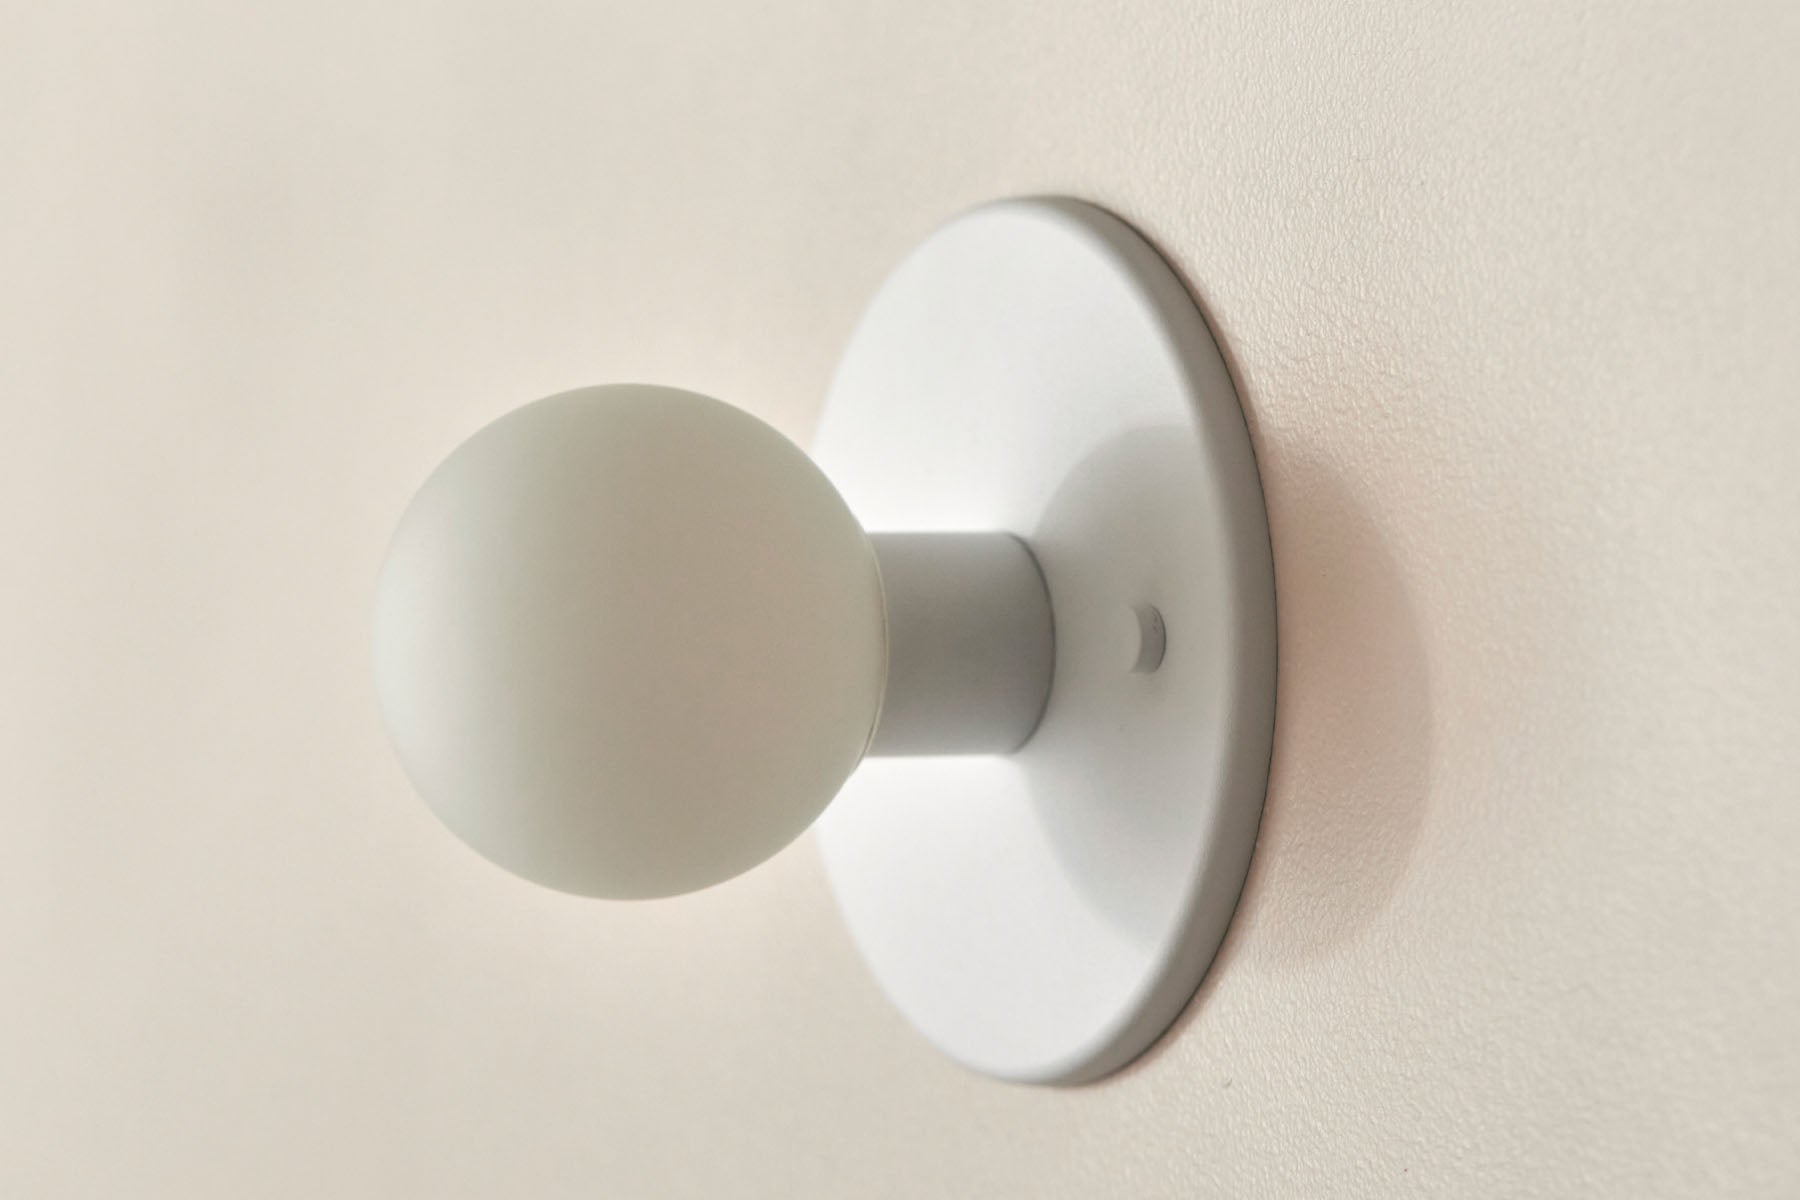 Orb Surface Sconce, Mini in White Satin and White Frosted. Image by Lawrence Furzey.